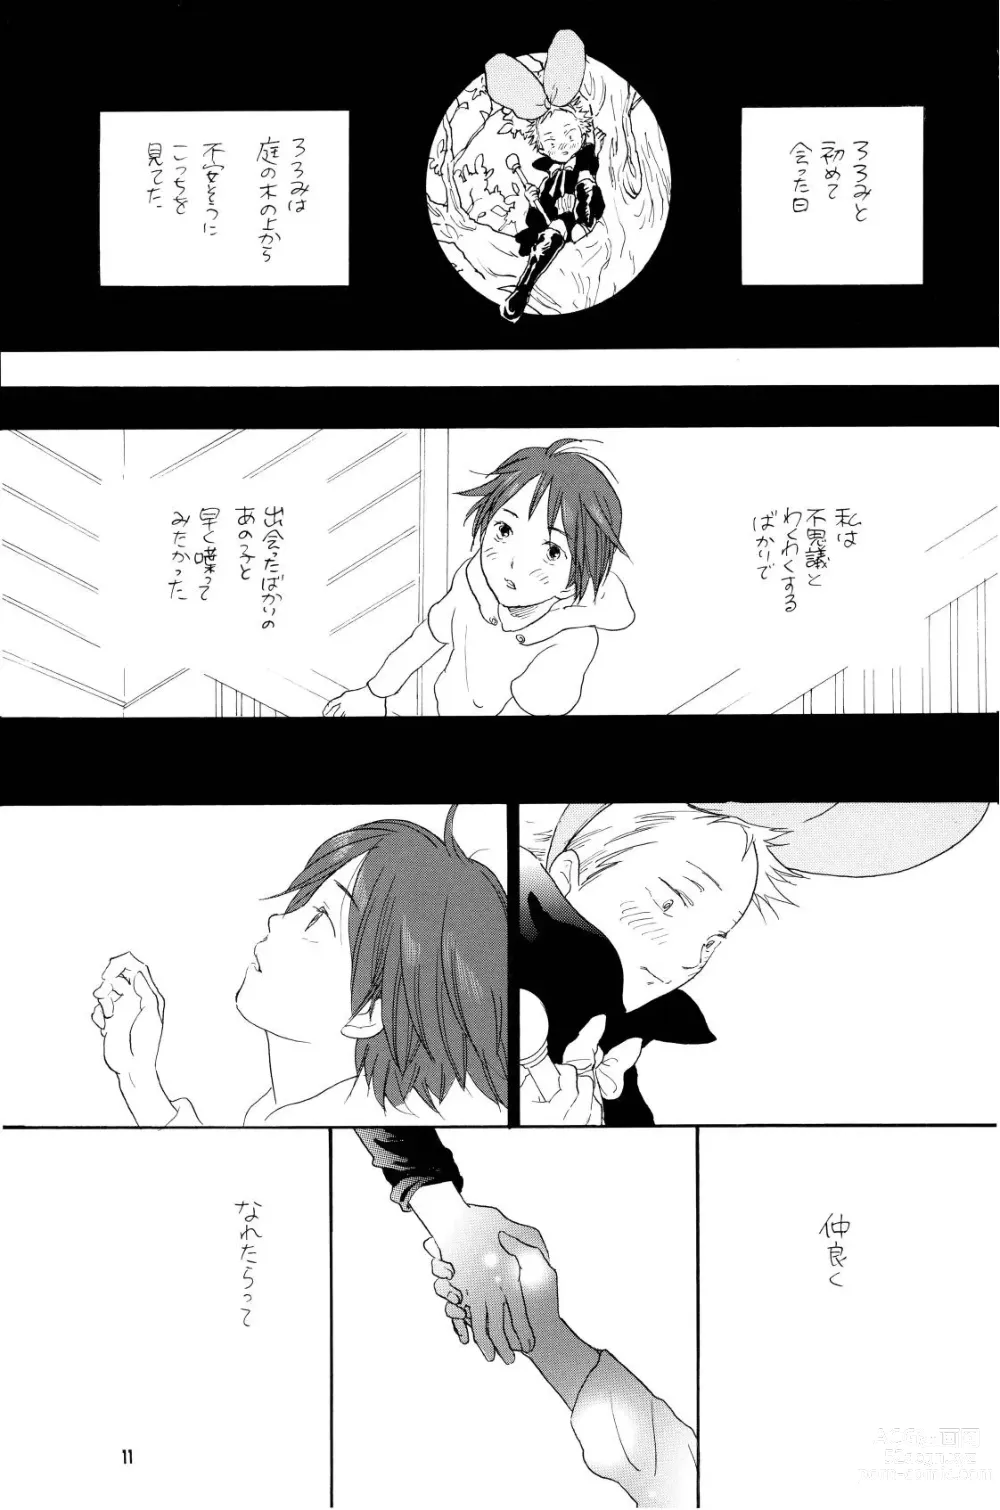 Page 10 of doujinshi your song